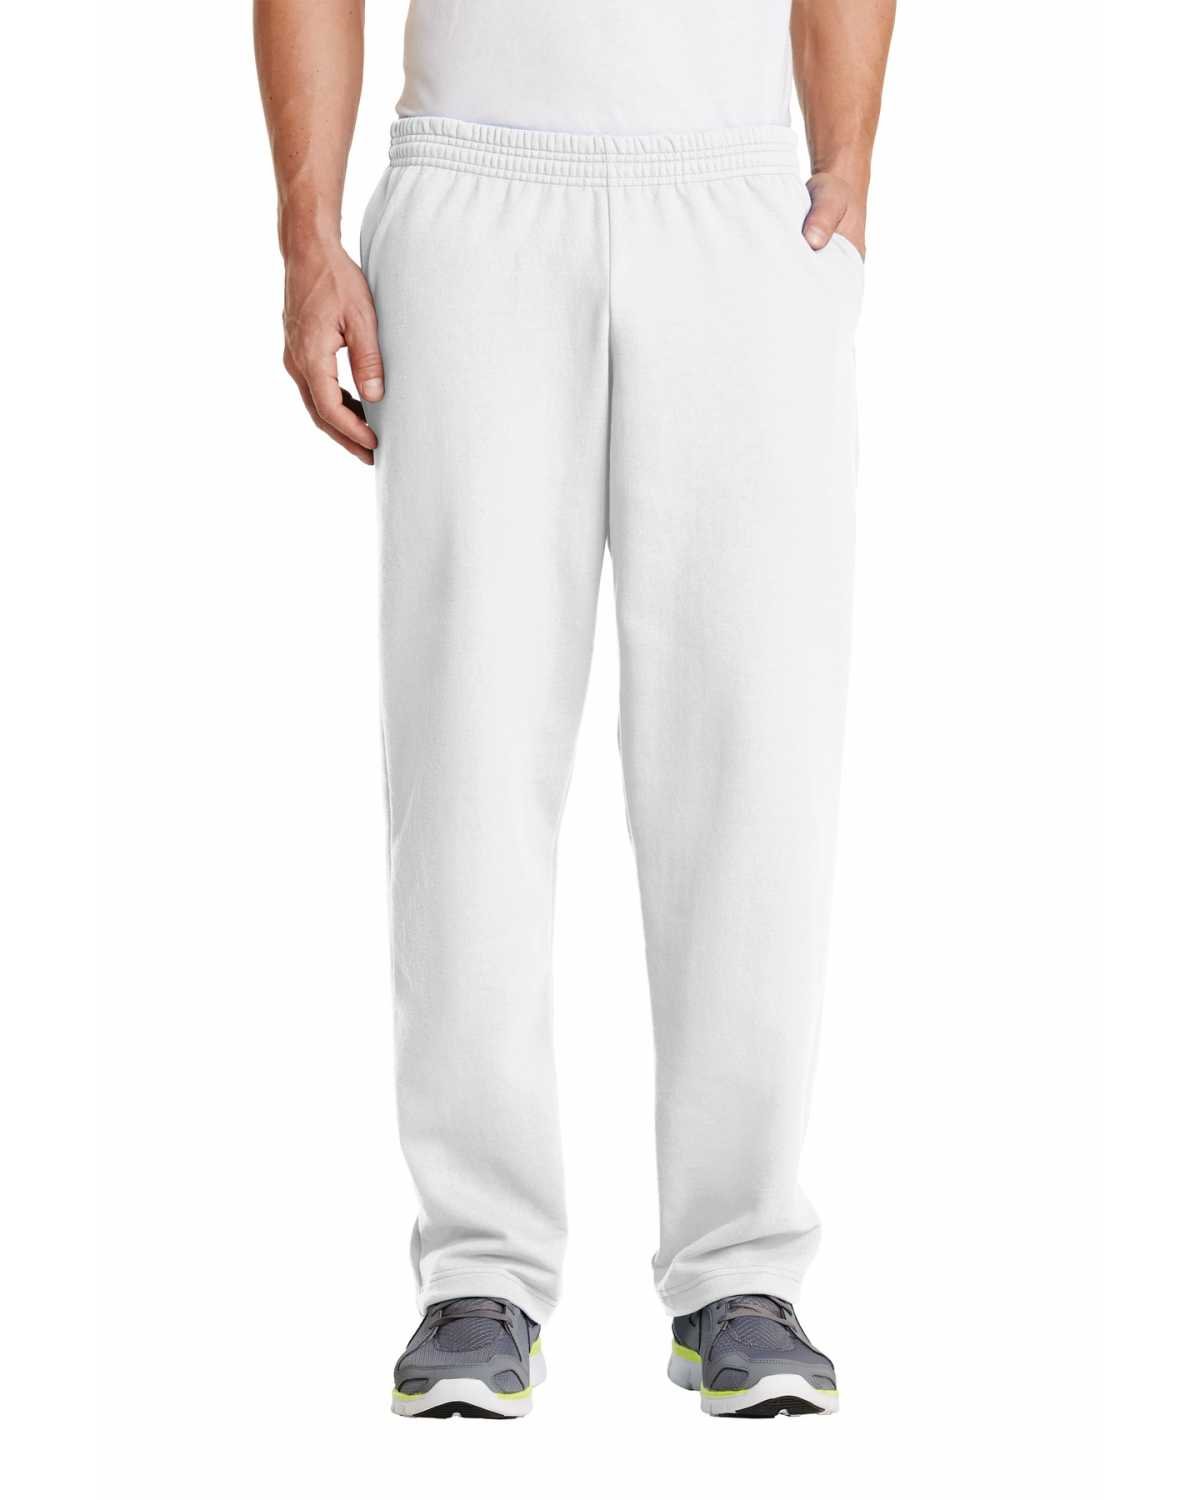 Port & Company PC78P Core Fleece Sweatpant with Pockets on discount ...